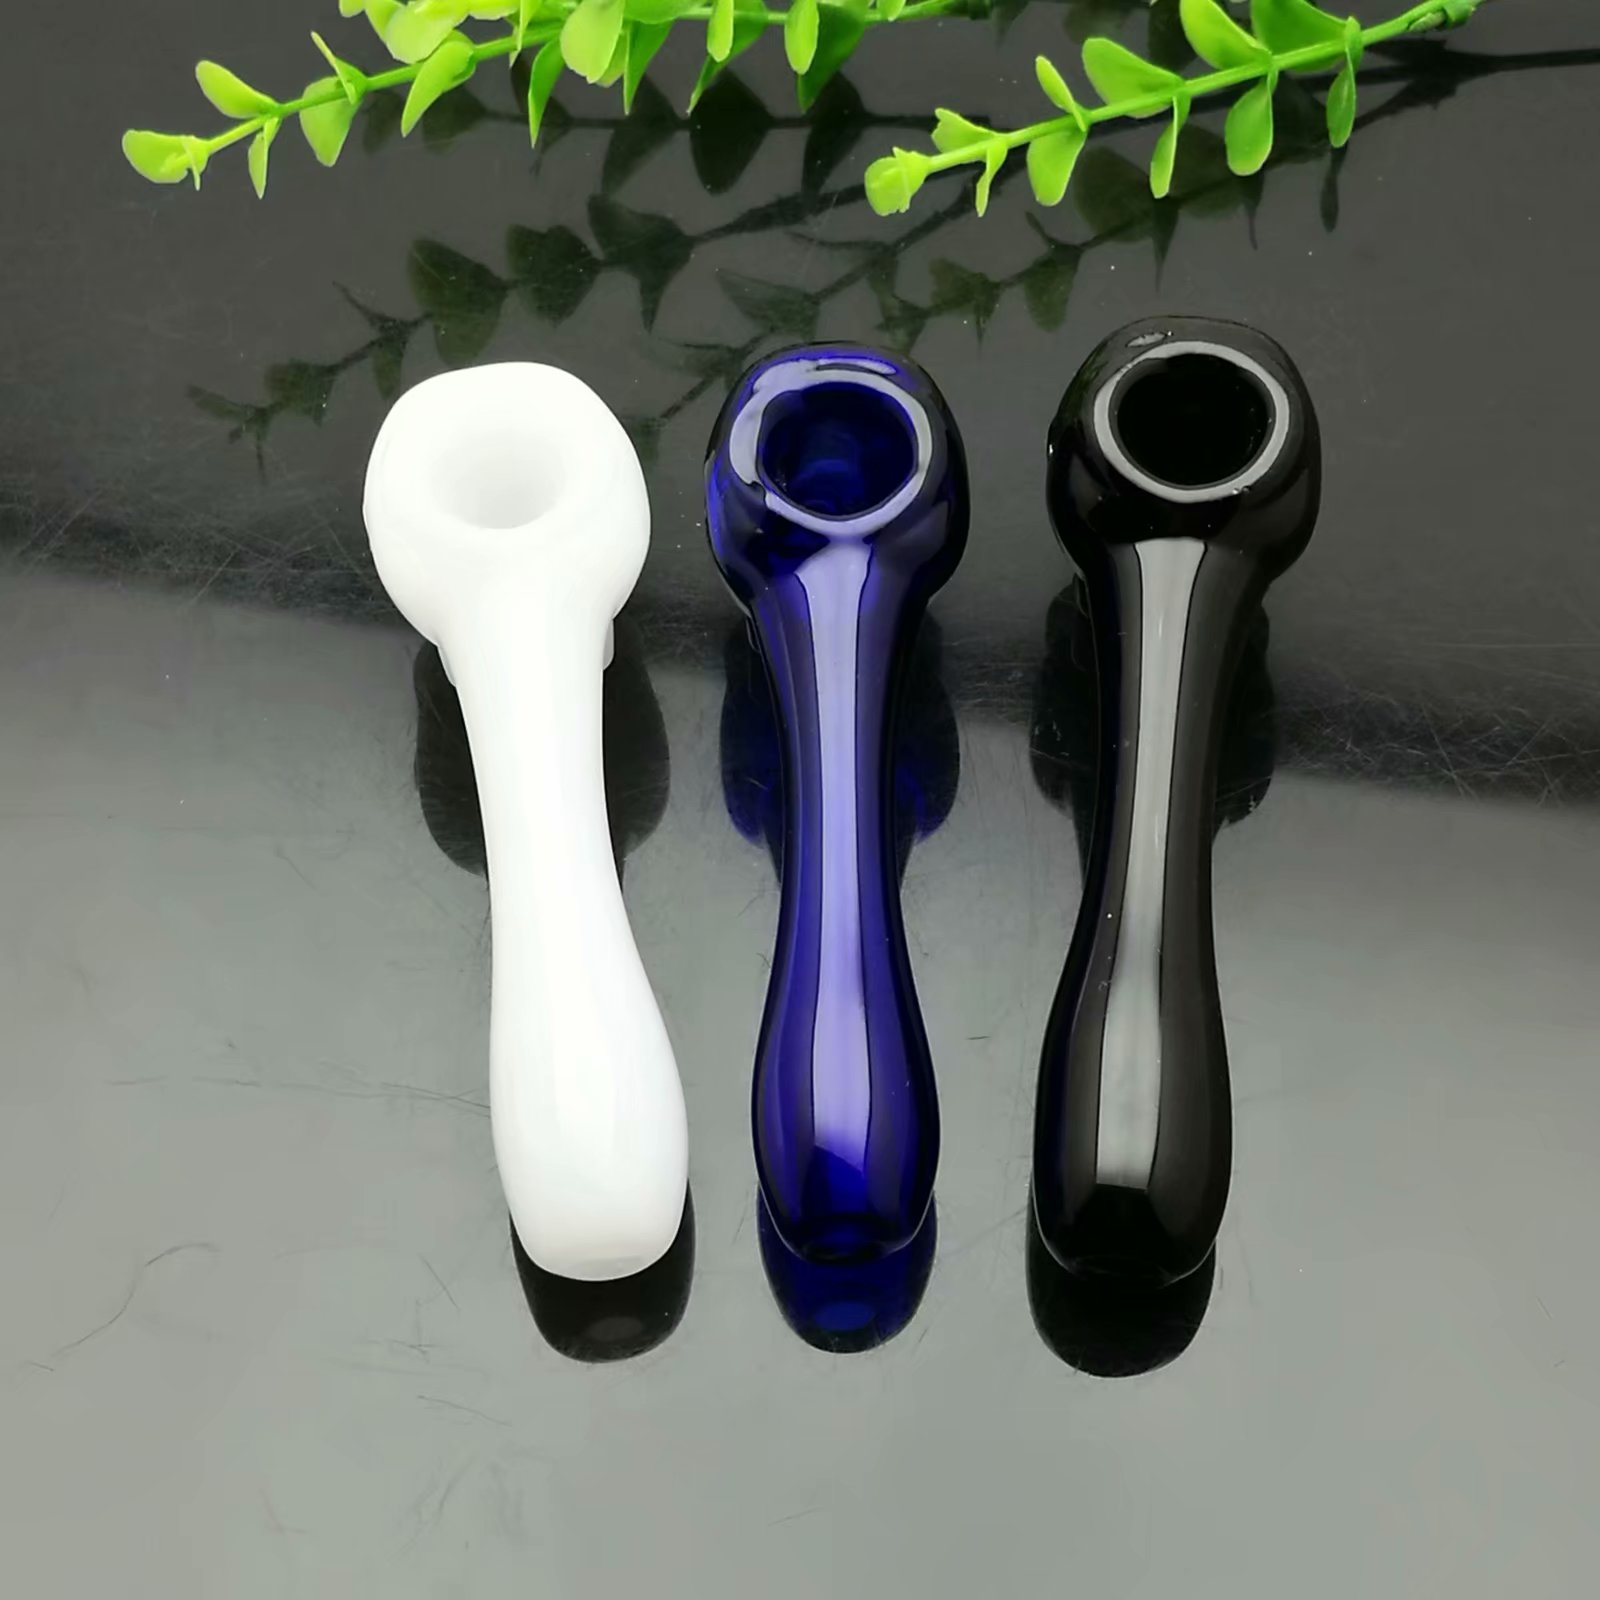 Hookahs Smoking Pipe Travel Tobacco Pipes Colored bone glass pipe